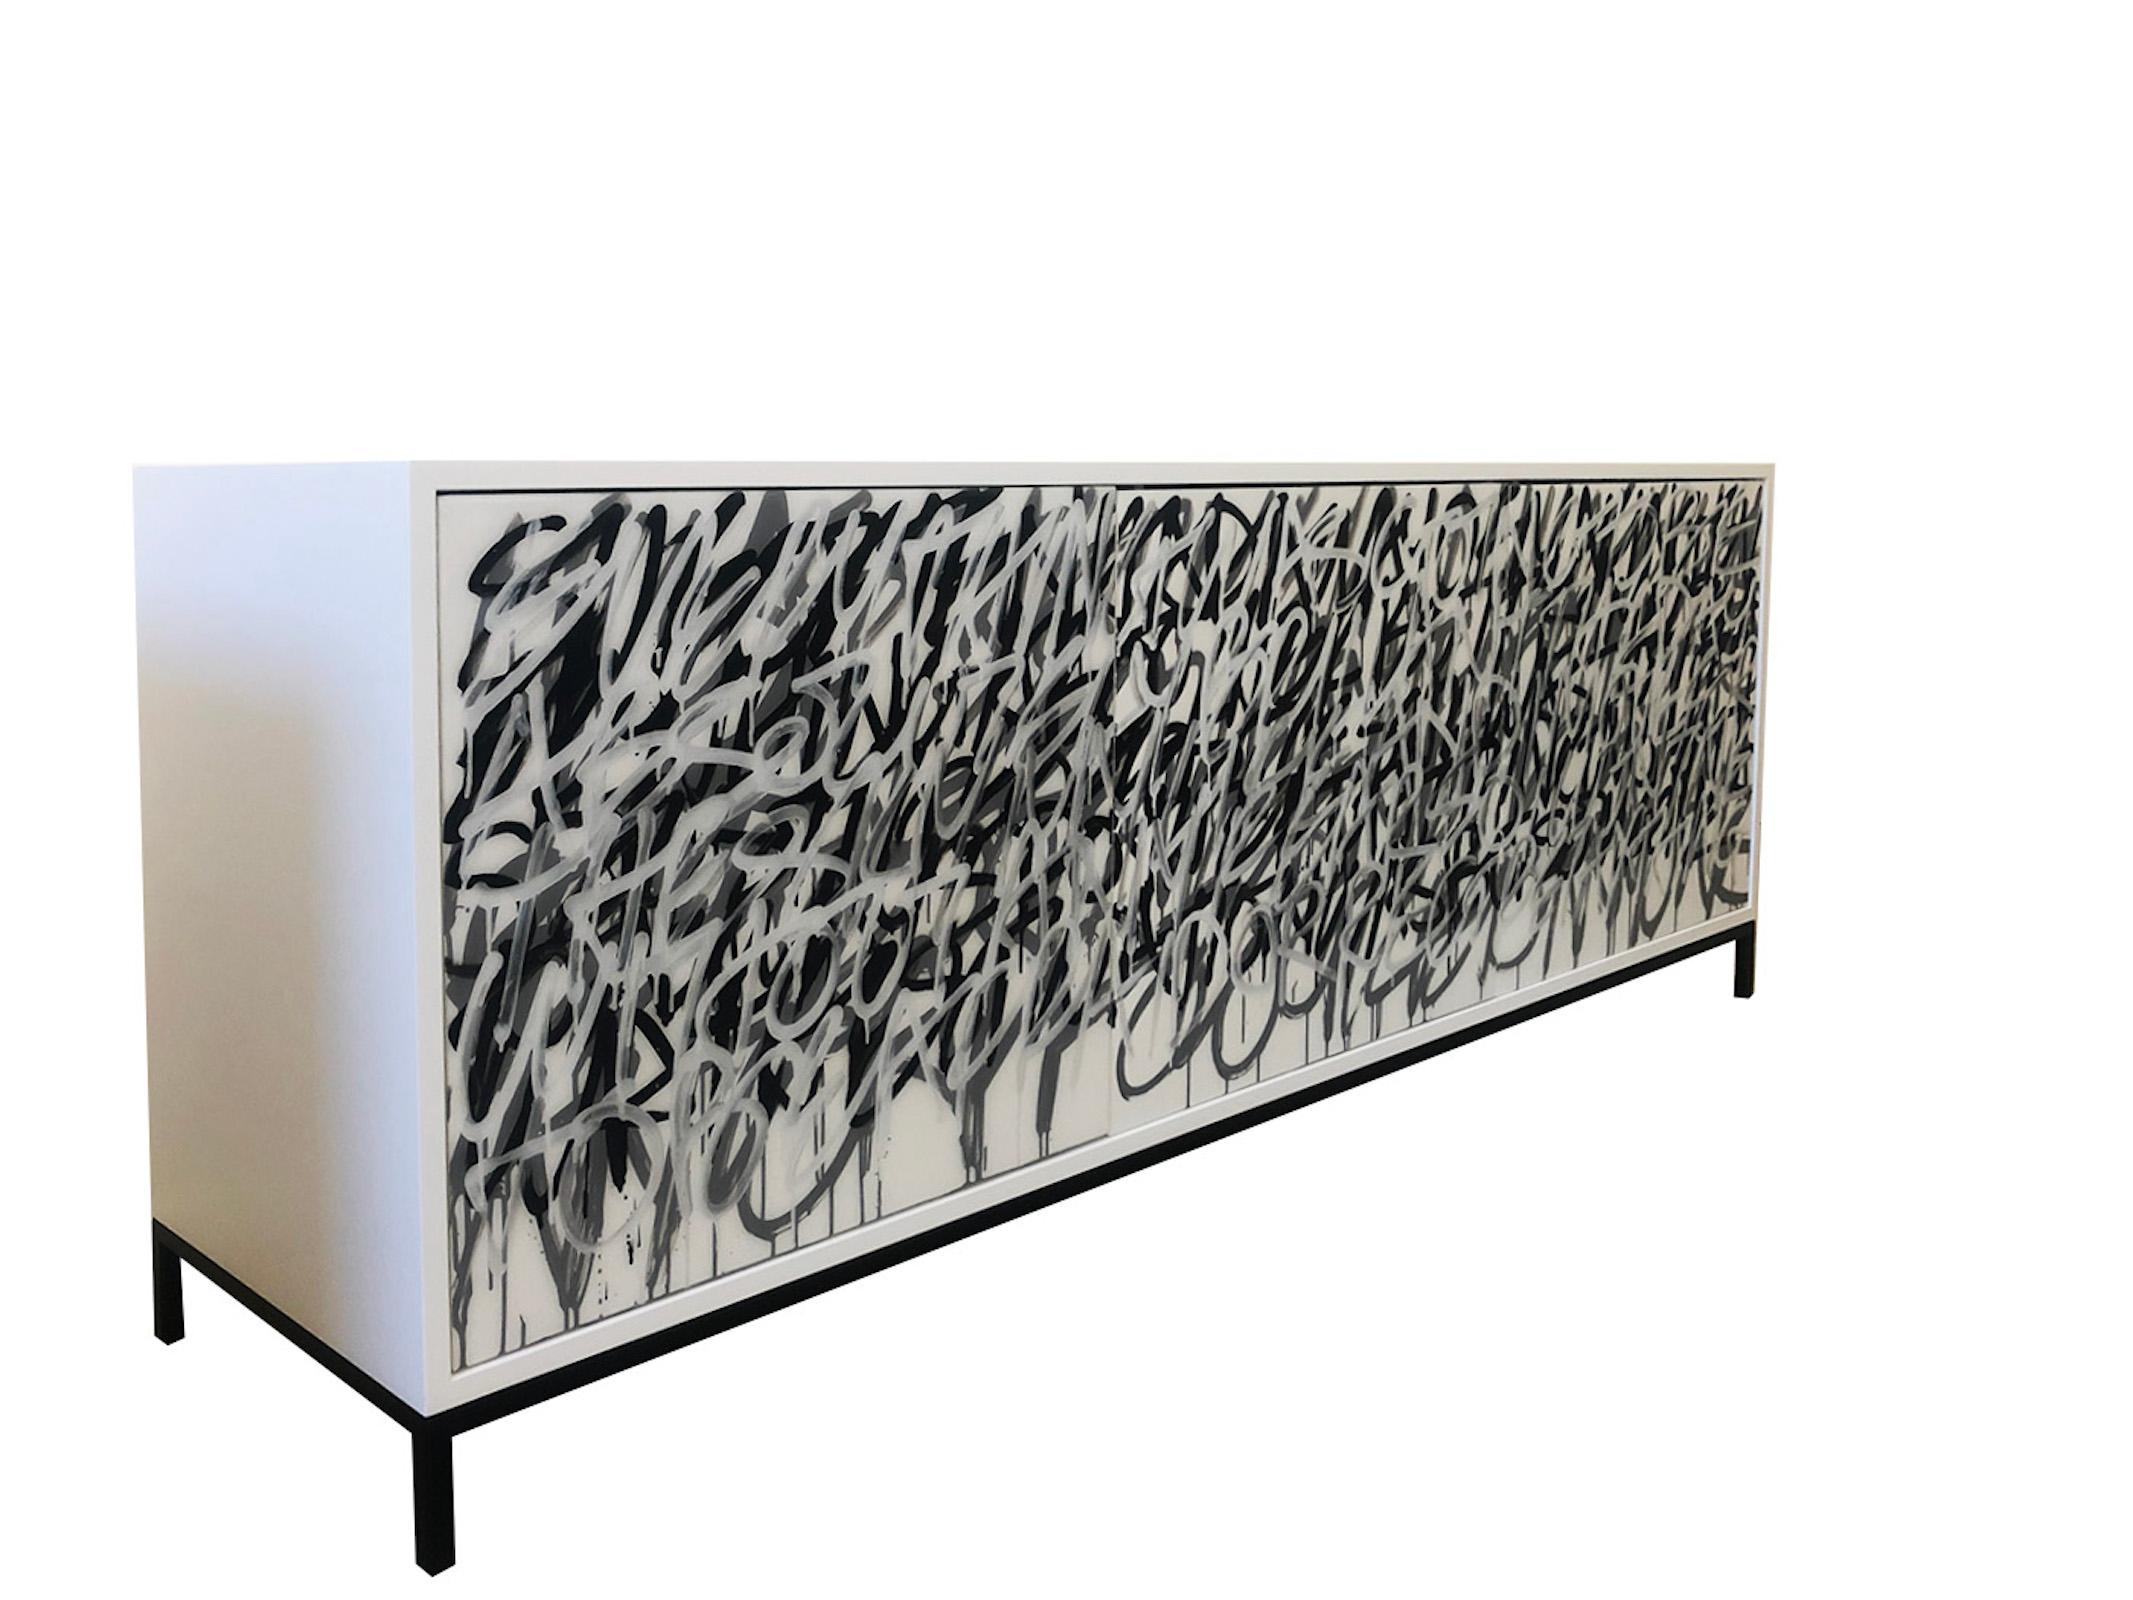 Our White Graffiti Cabinet is designed, and hand finished in our Toronto studio, Morgan Clayhall.

This design is based on our classic Say It Again graffiti cabinet.  We have interpret it into a light version with more white in the artwork.

The